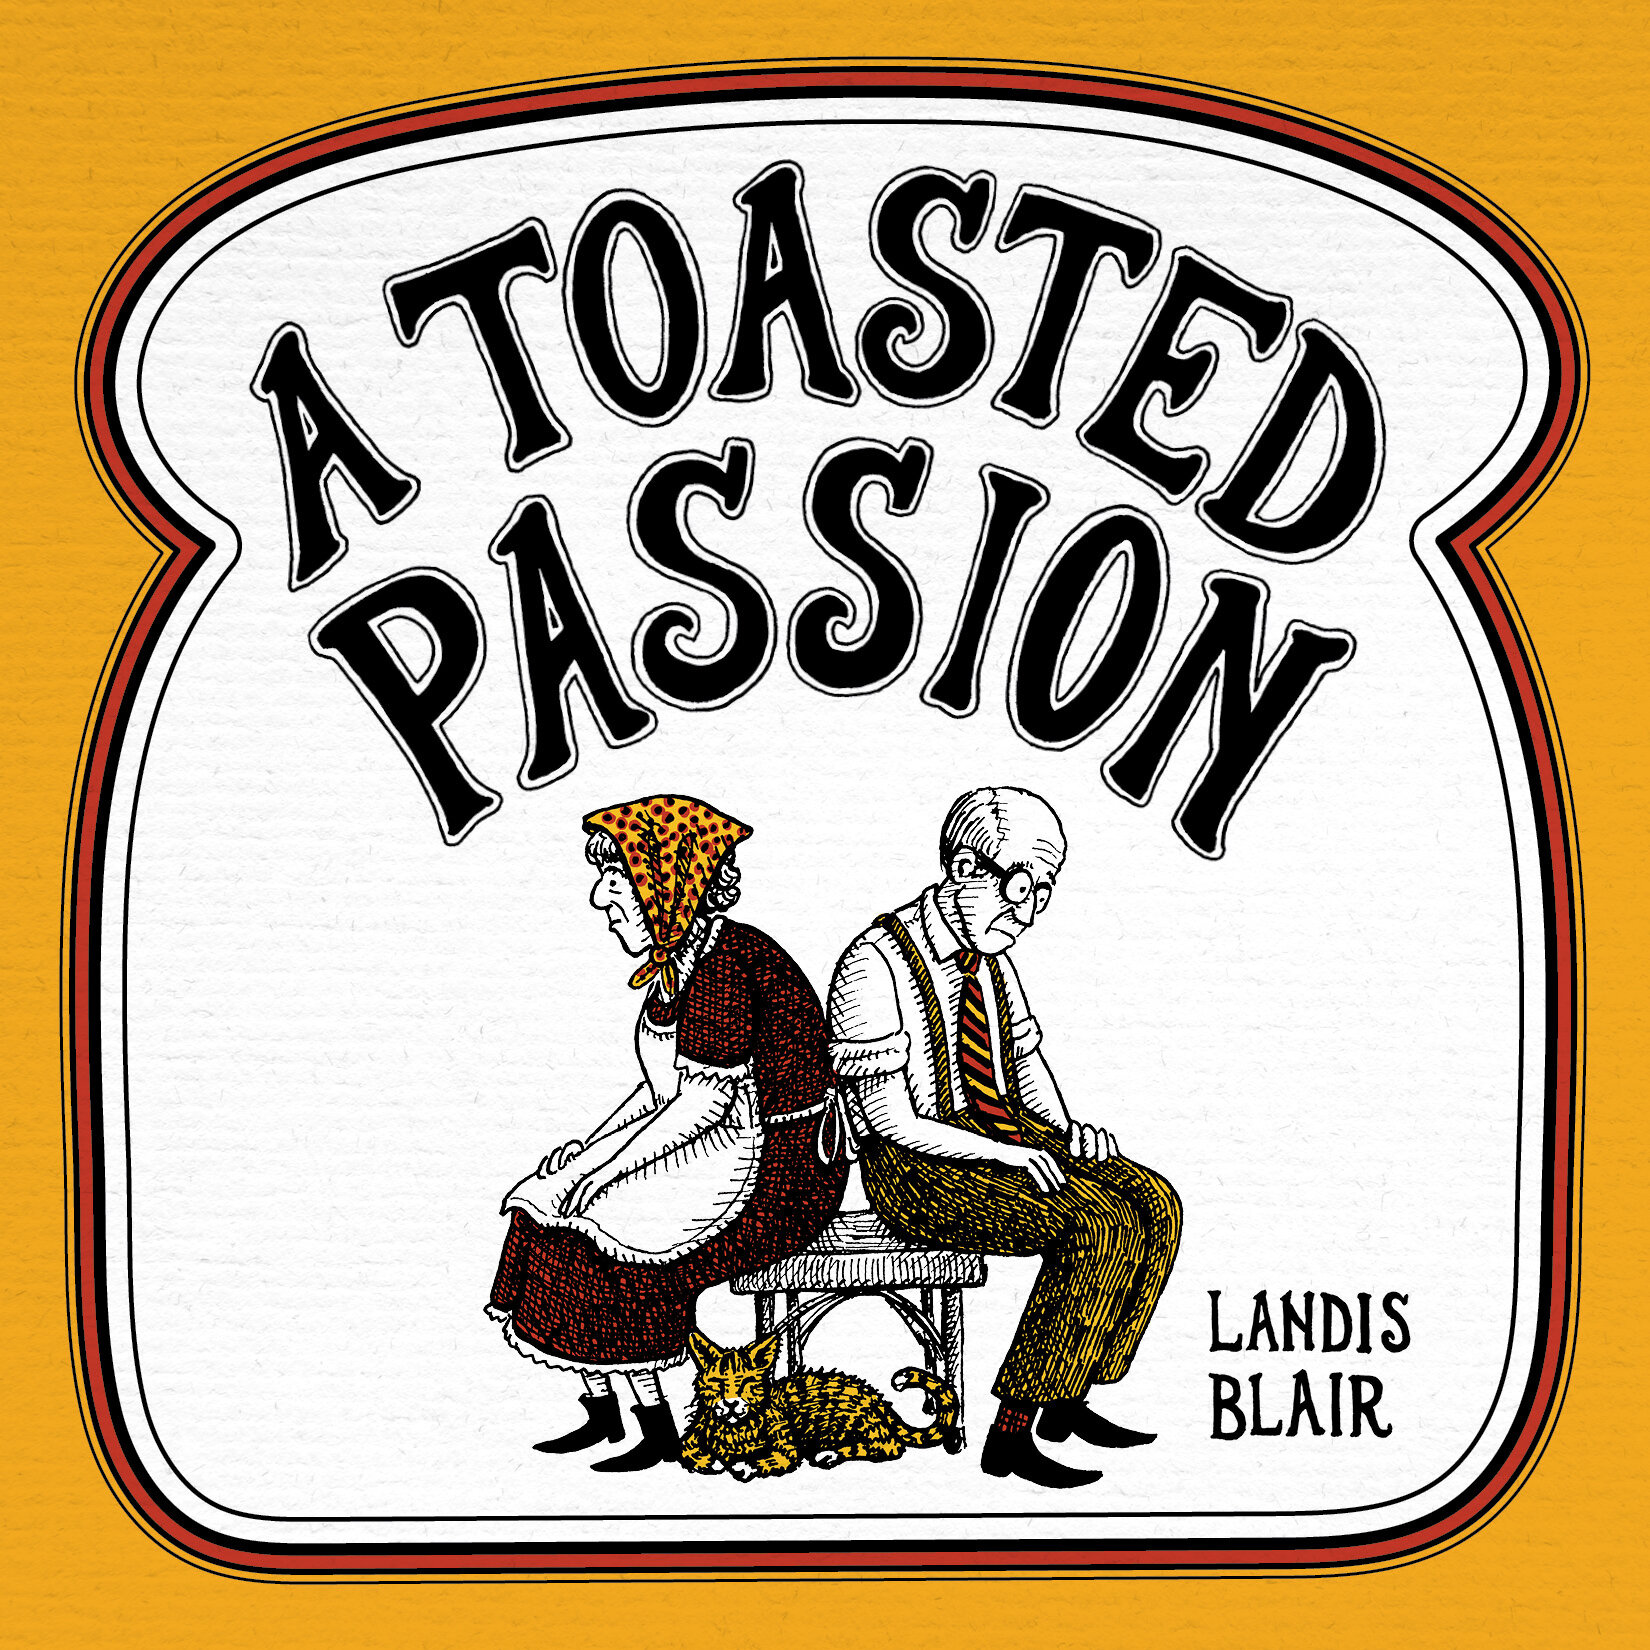 A Toasted Passion, 2017